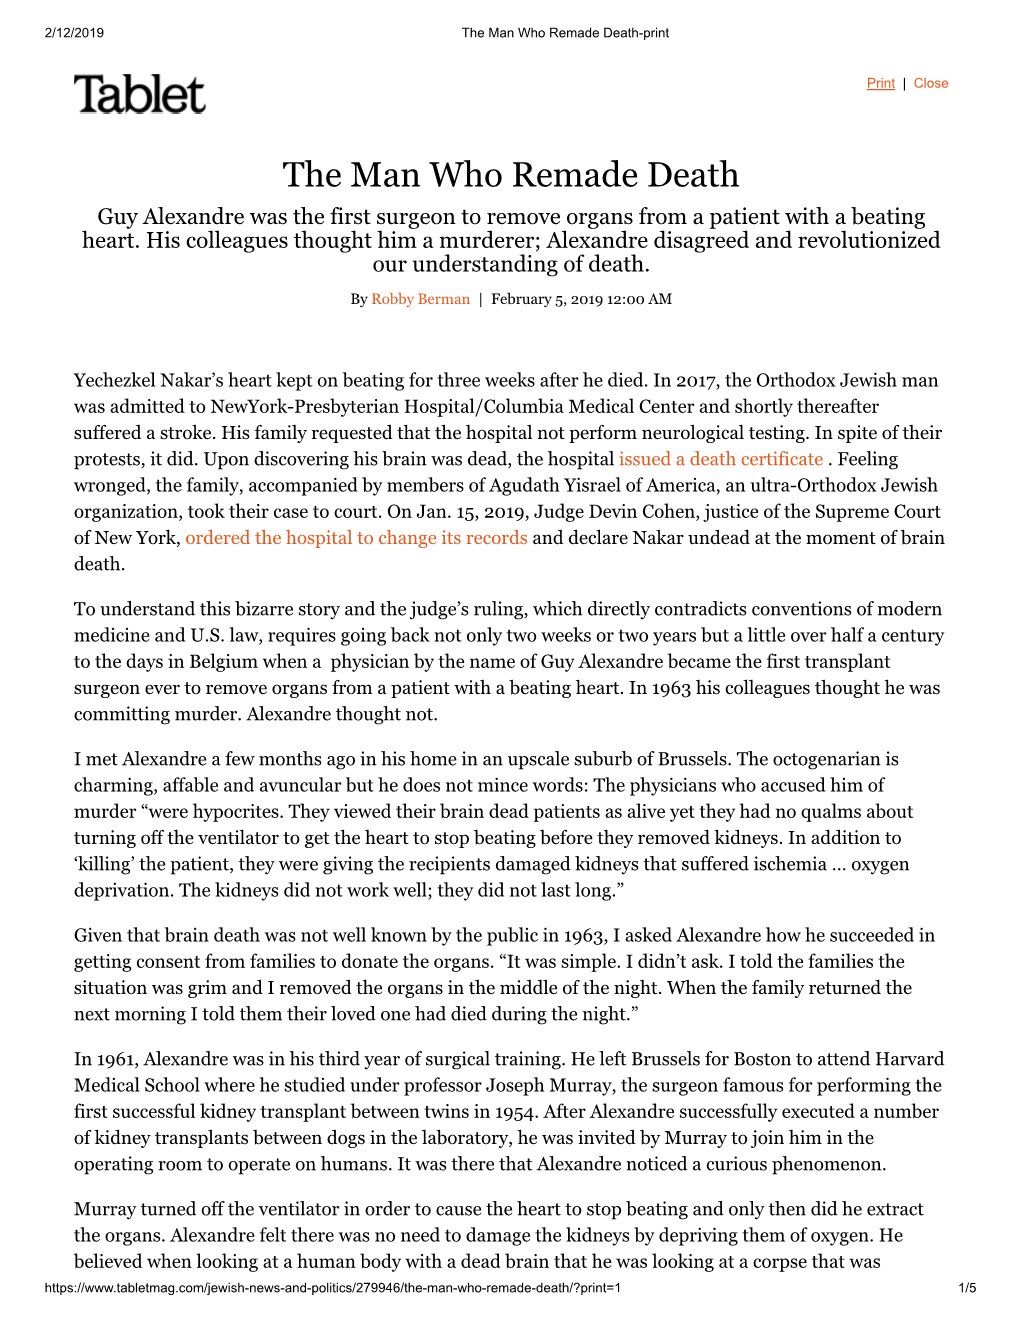 The Man Who Remade Death-Print